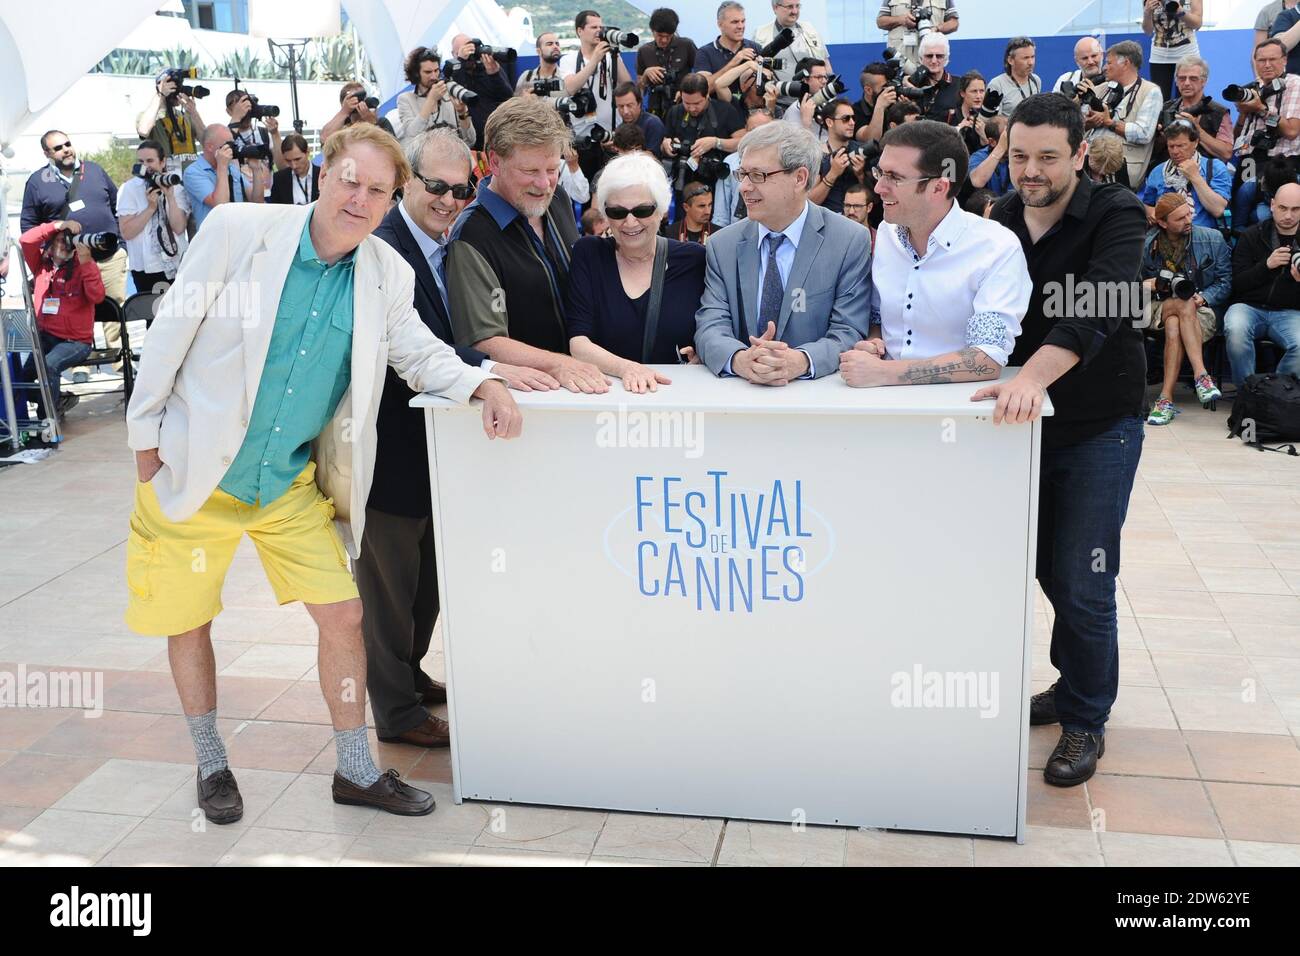 Roger Allers, Tomm Moore, Joan C Gratz, Joan Sfar, Bill Plympton, Paul Brizzi, Gaetan Brizzi posing at Homage To The Cinema D'Animation photocall held at the Palais Des Festivals in Cannes, France on May 17, 2014, as part of the 67th Cannes Film Festival. Photo by Aurore Marechal/ABACAPRESS.COM Stock Photo